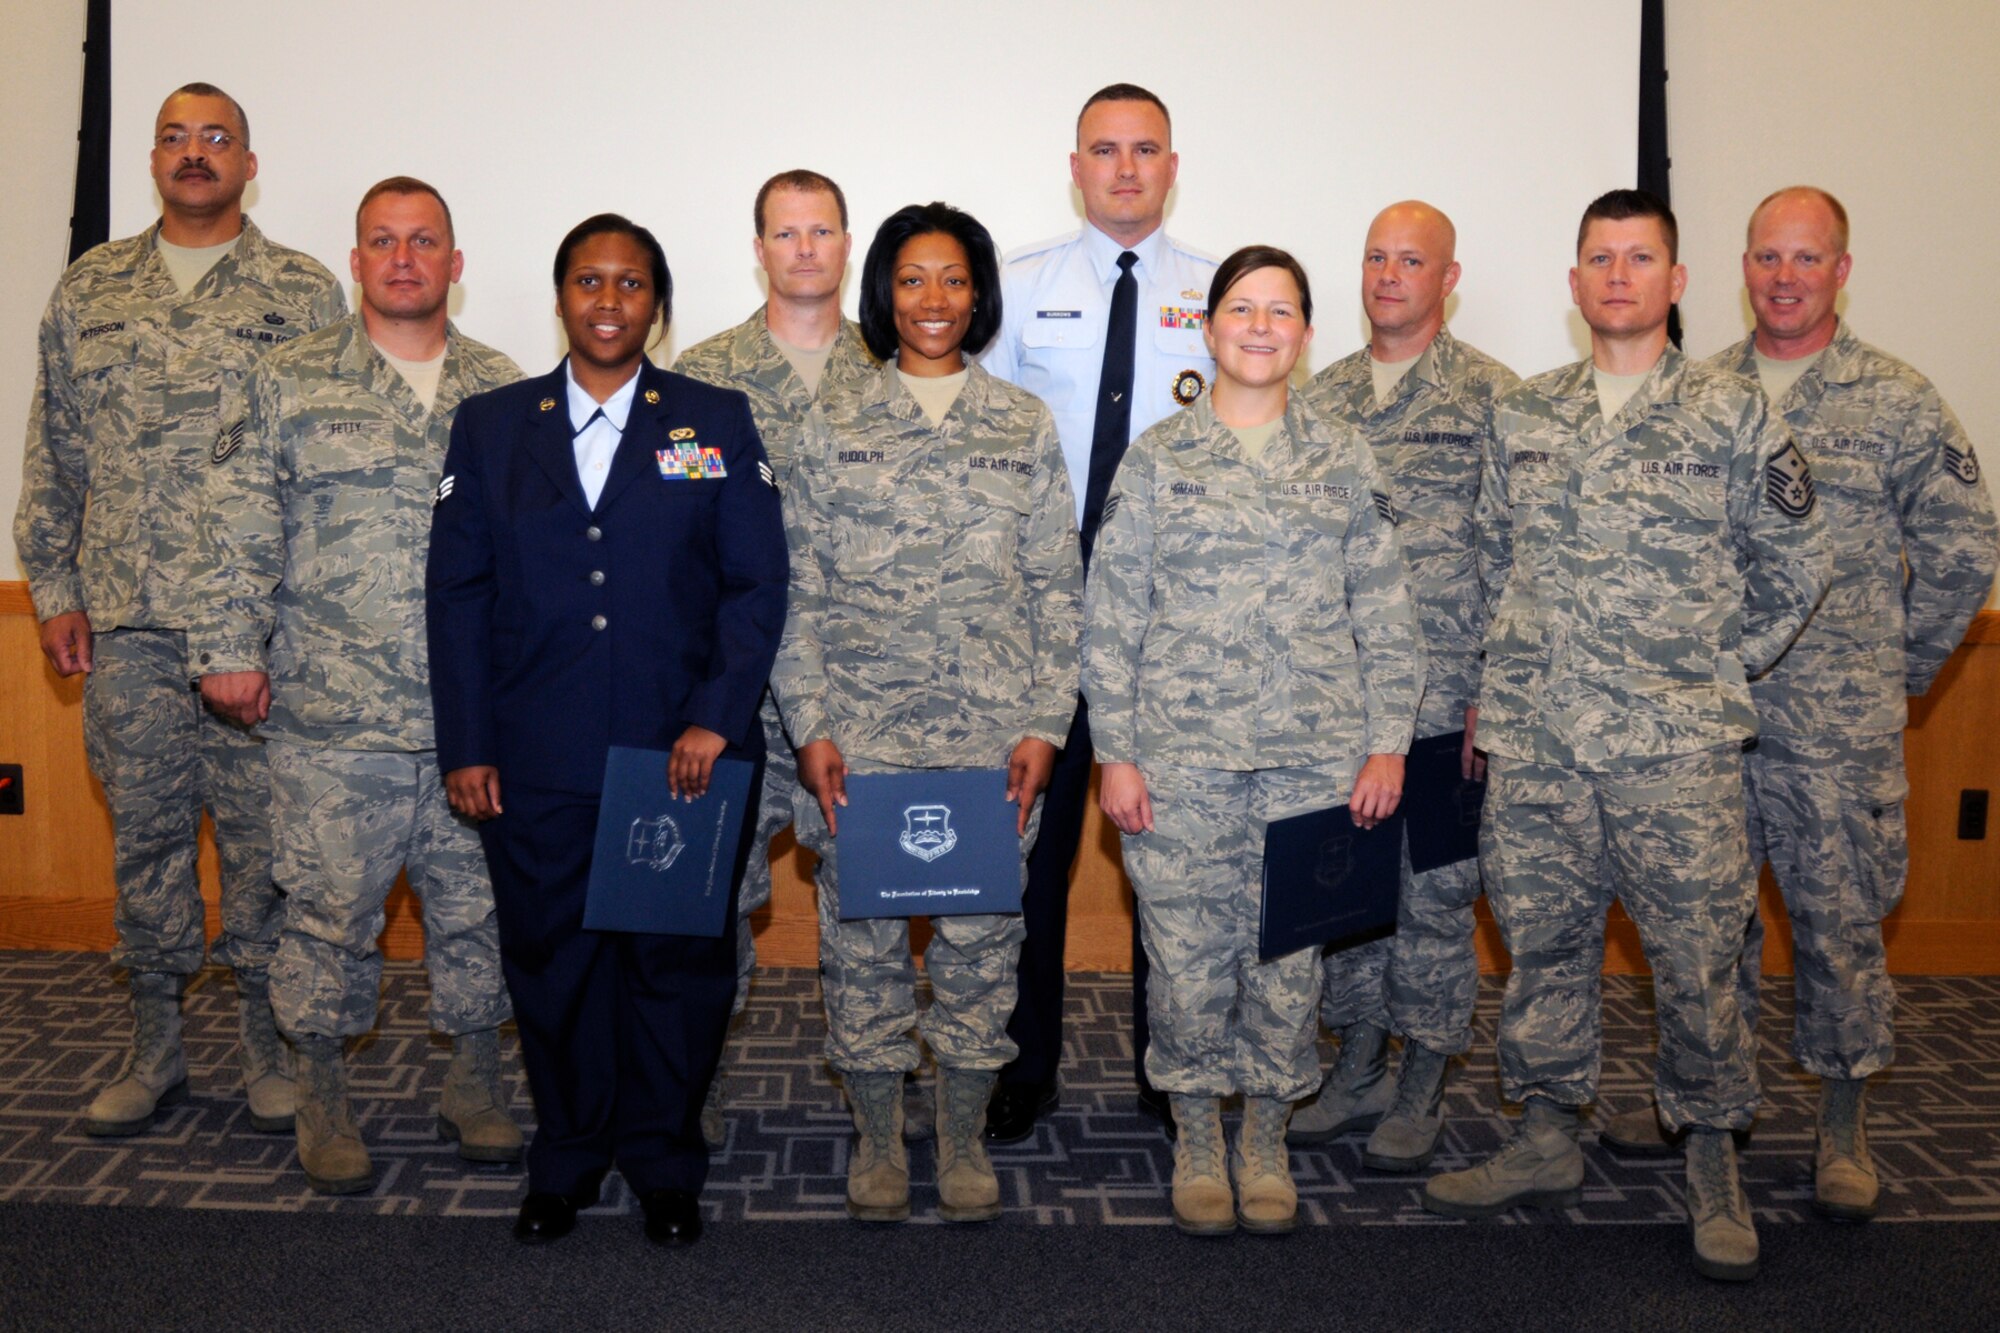 The members of the 2012 Community College of the Air Force graduating class from the 127th Wing at Selfridge Air National Guard Base, Mich., gather after receiving their diplomas during a May 20, 2012, ceremony. The CCAF provides an avenue for Airmen to gain credit for their formal military technical training. (U.S. Air Force photo by TSgt. David Kujawa)